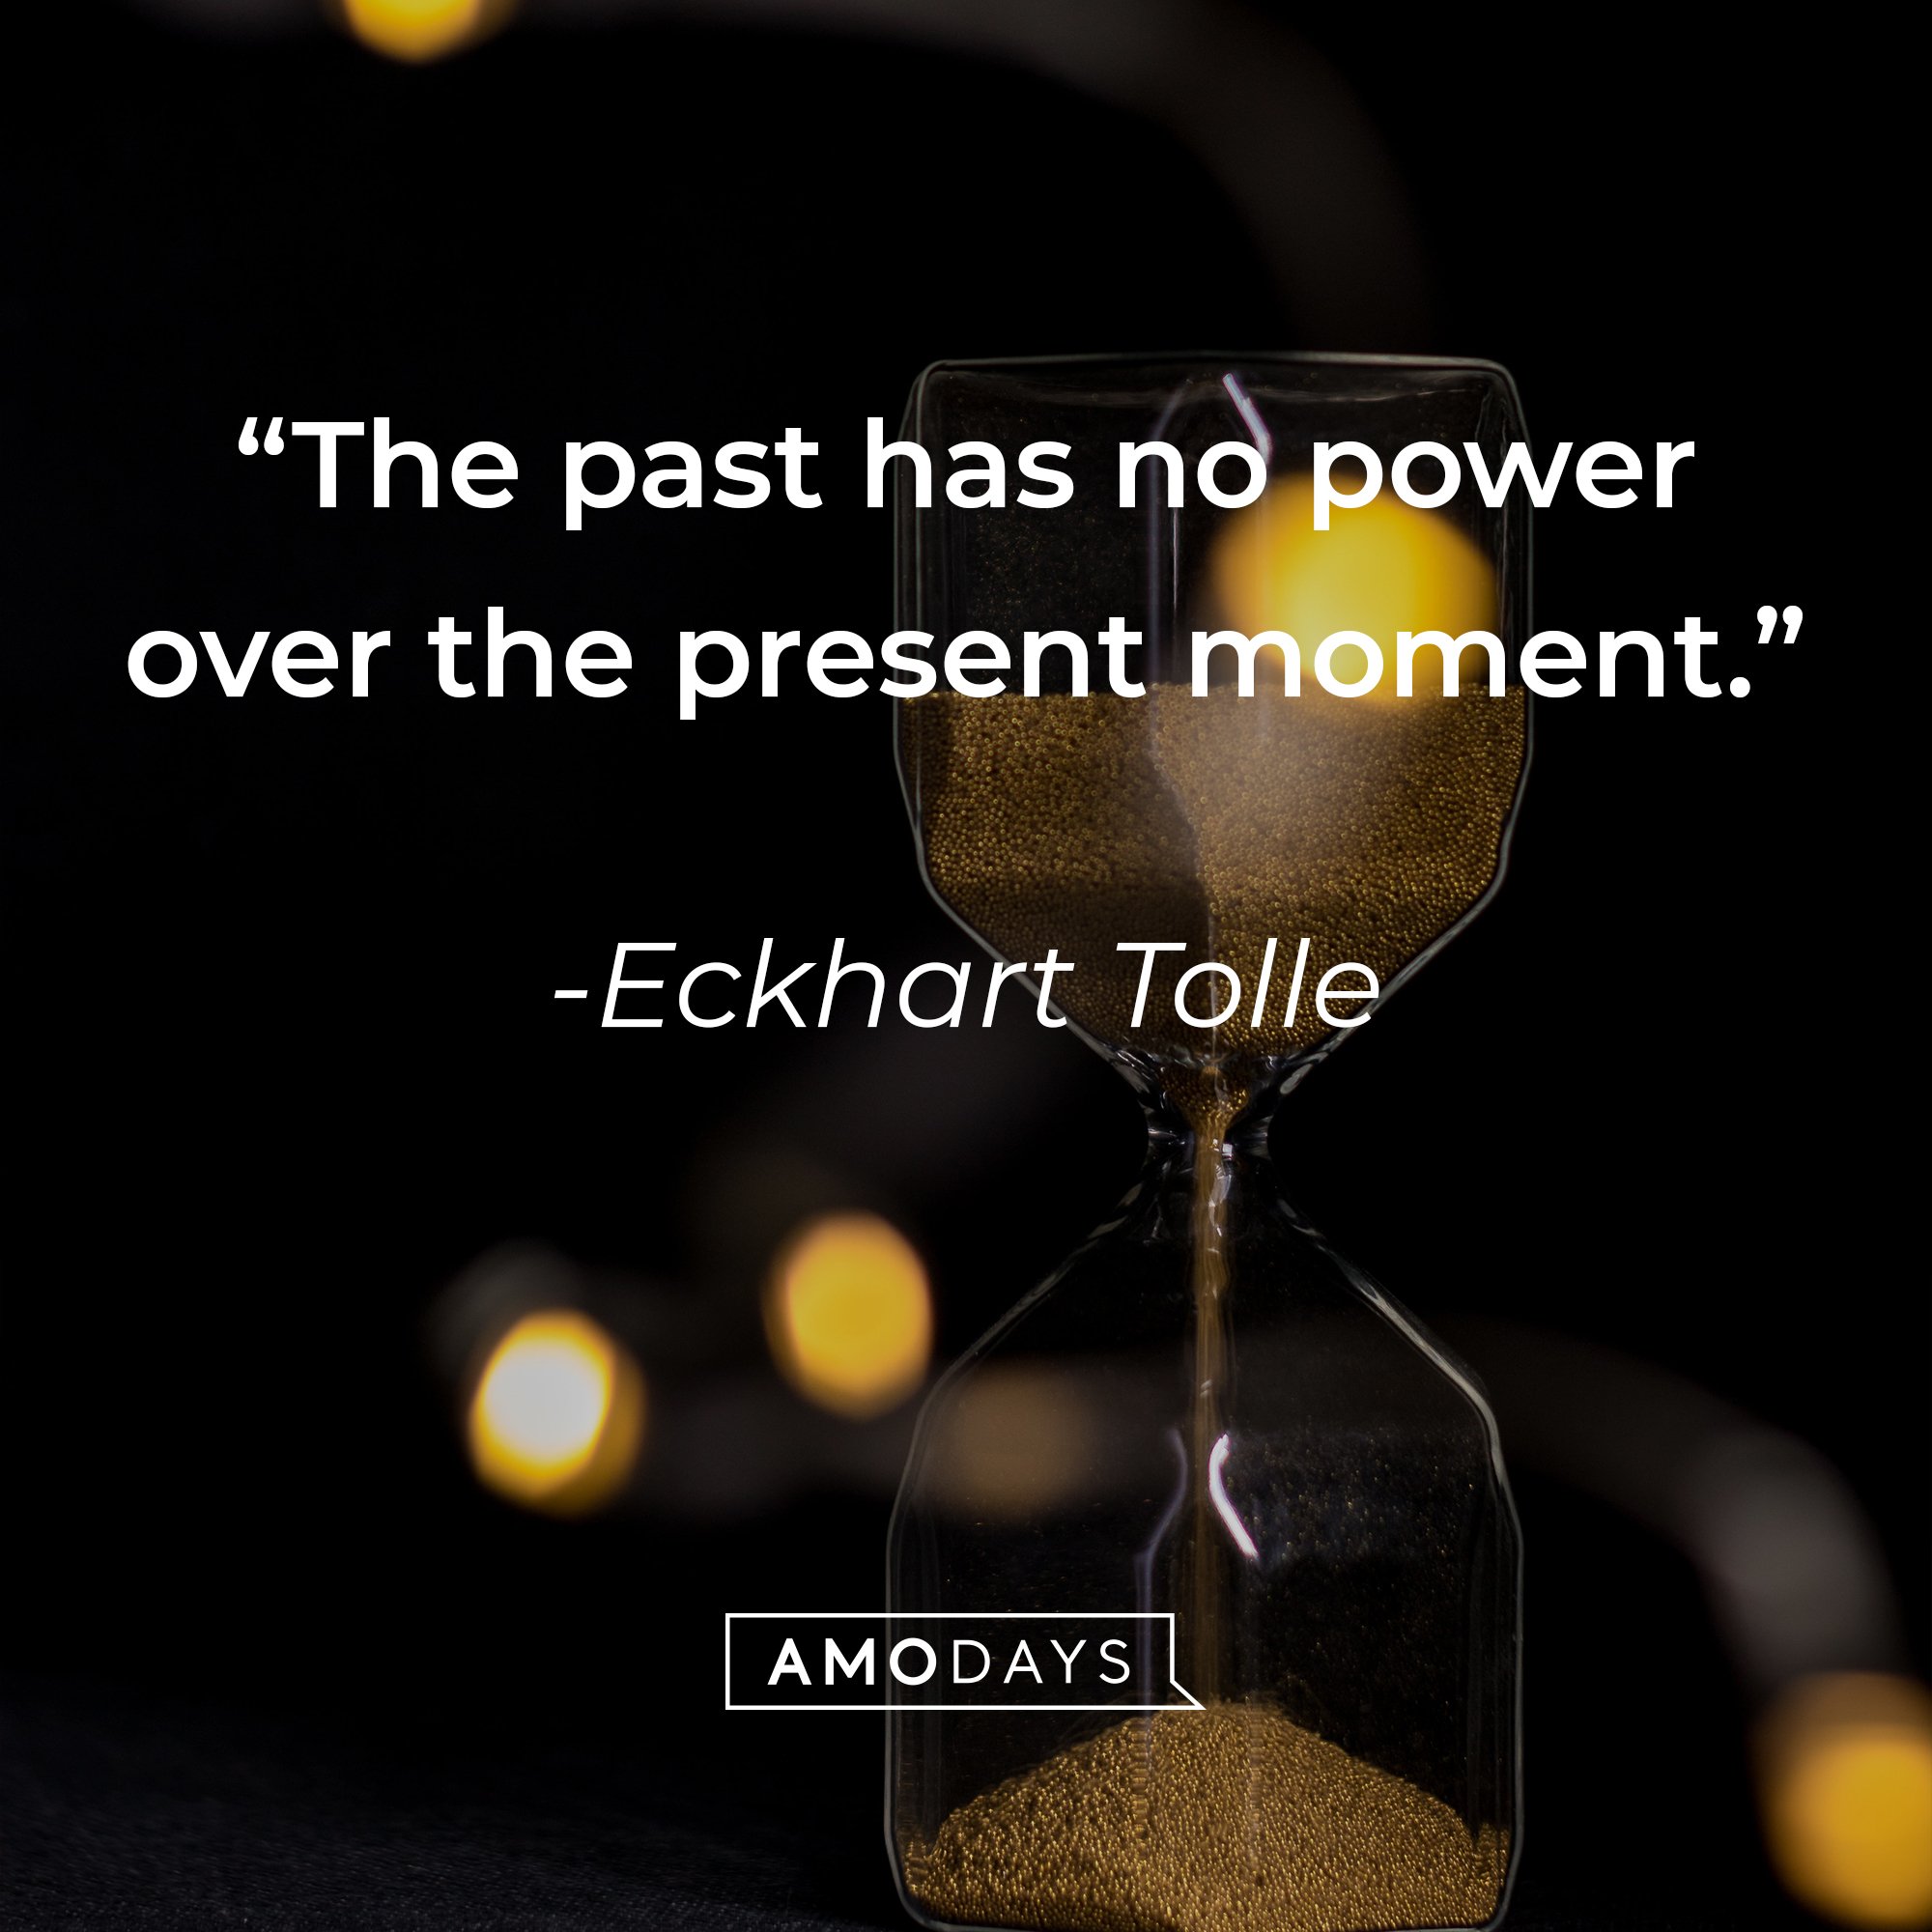 Eckhart Tolle’s quote: “The past has no power over the present moment.” | Image: Amodays